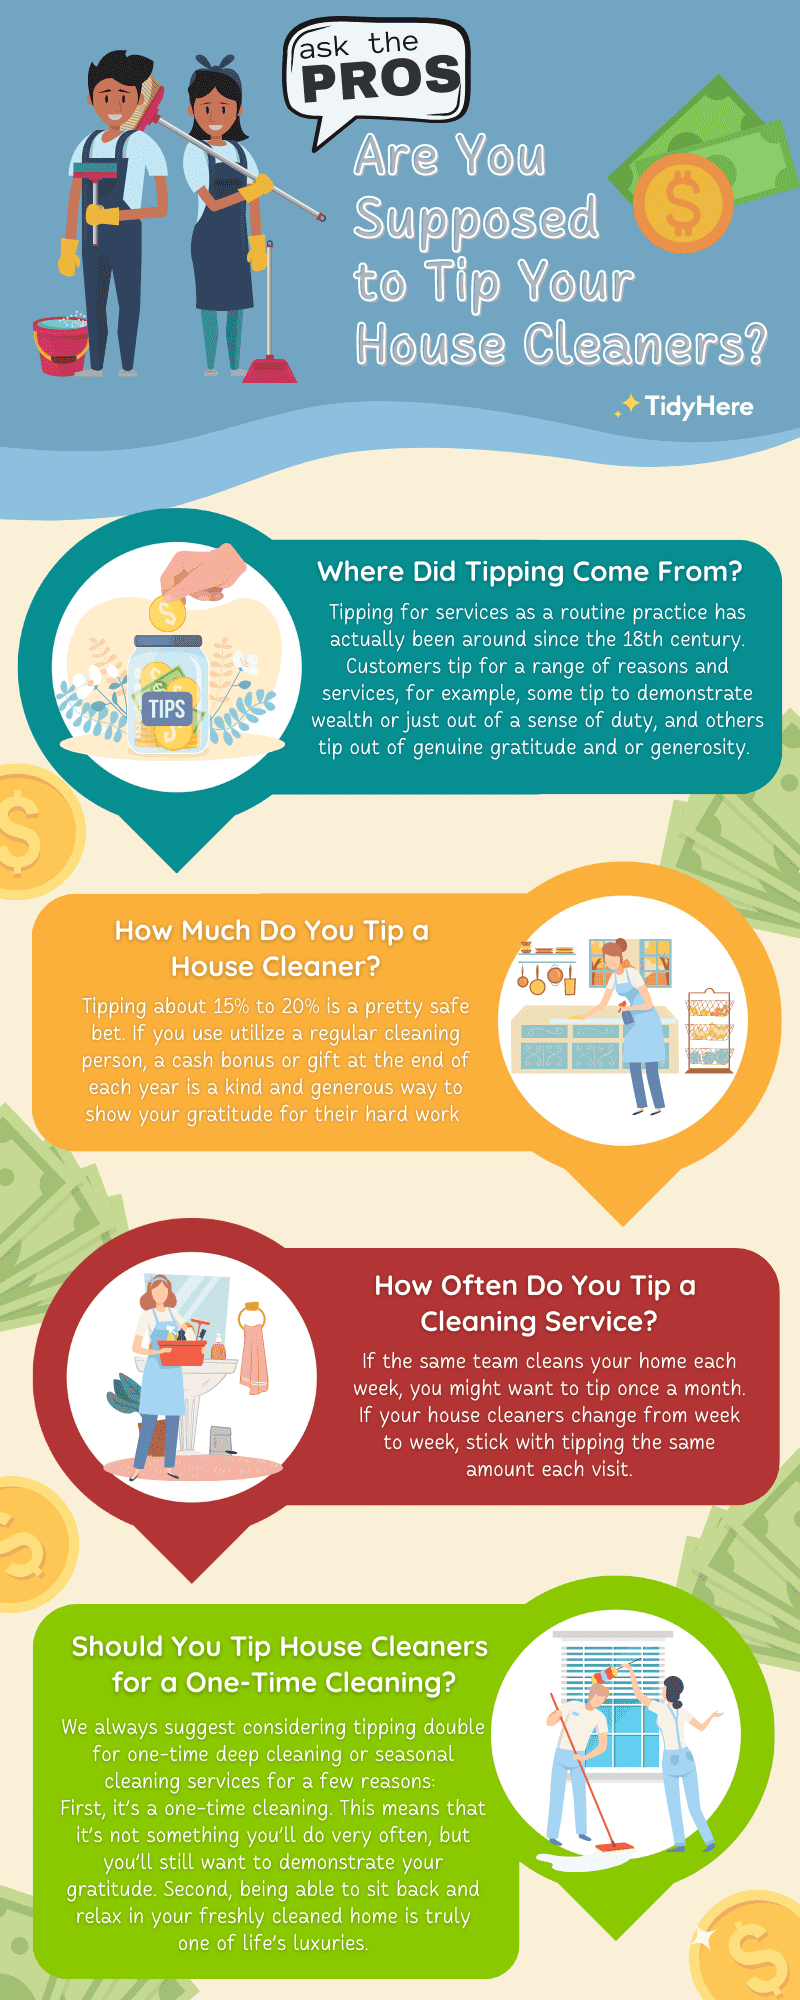 Ask the Pros: Are You Supposed to Tip Your House Cleaners? TidyHere Infographic